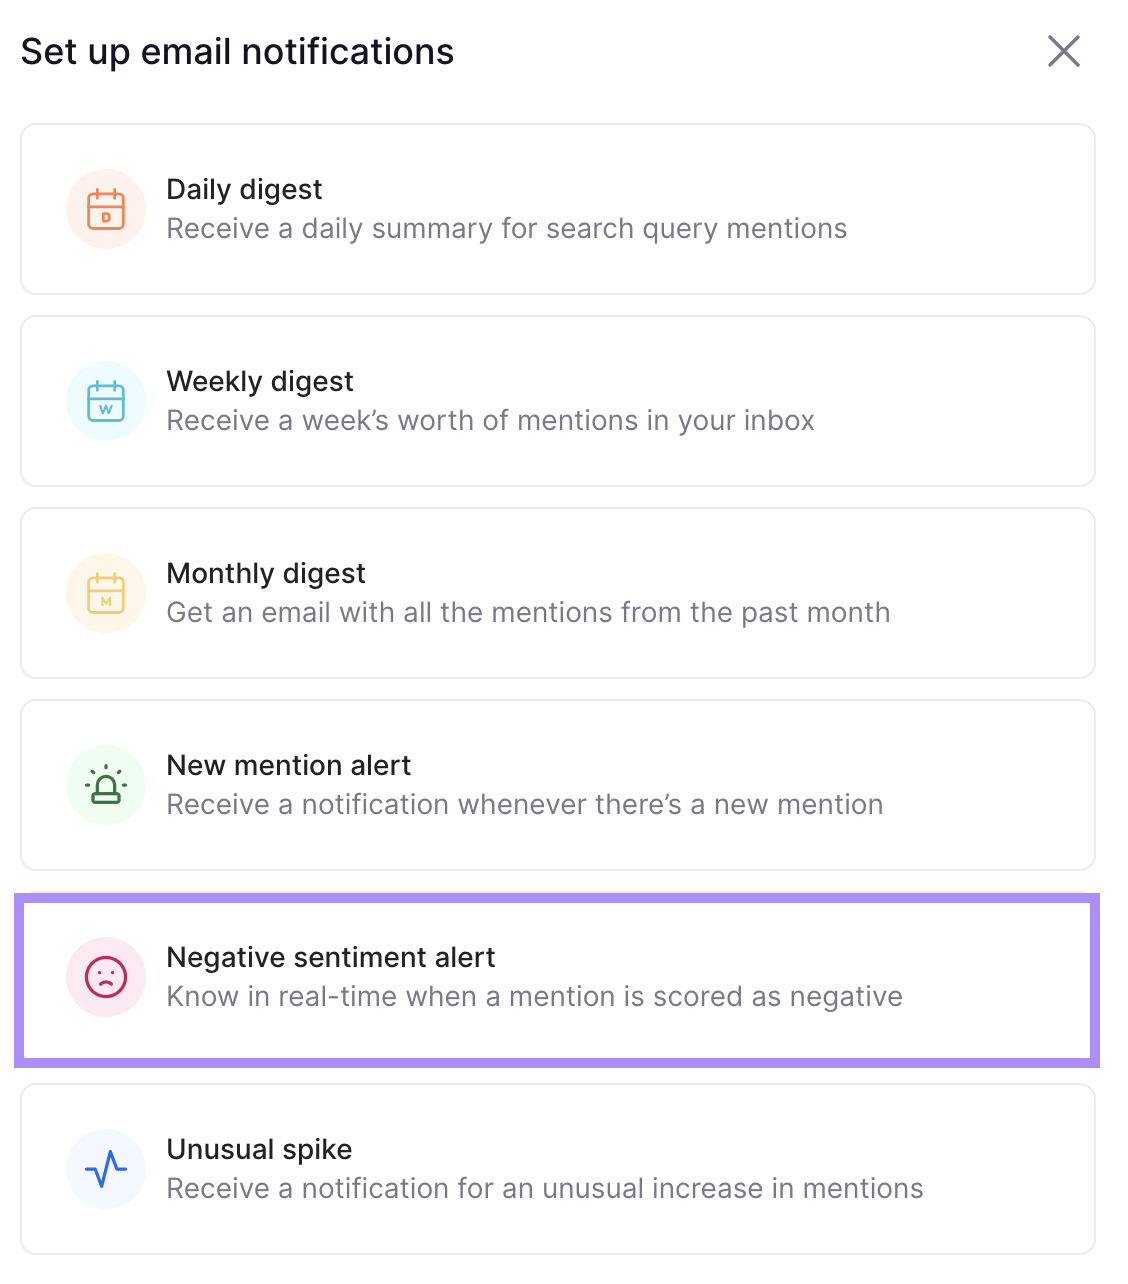 “Negative sentiment alert" selected from the email notifications menu